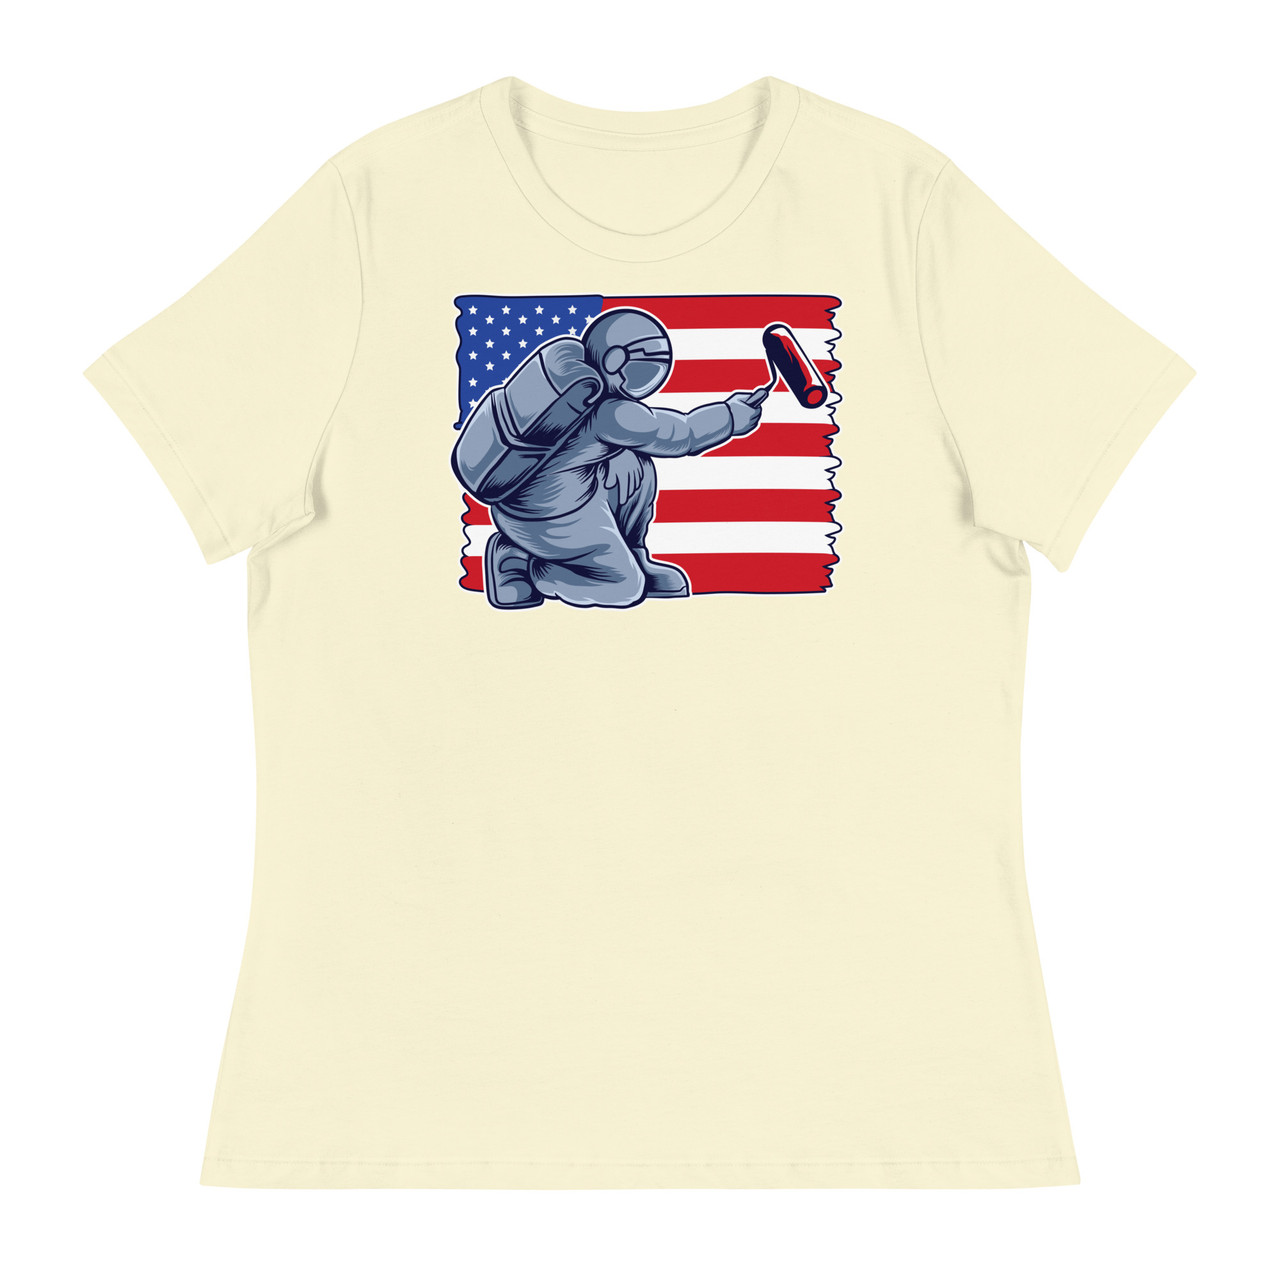 Astronaut Painting Flag Women's Relaxed T-Shirt - Bella + Canvas 6400